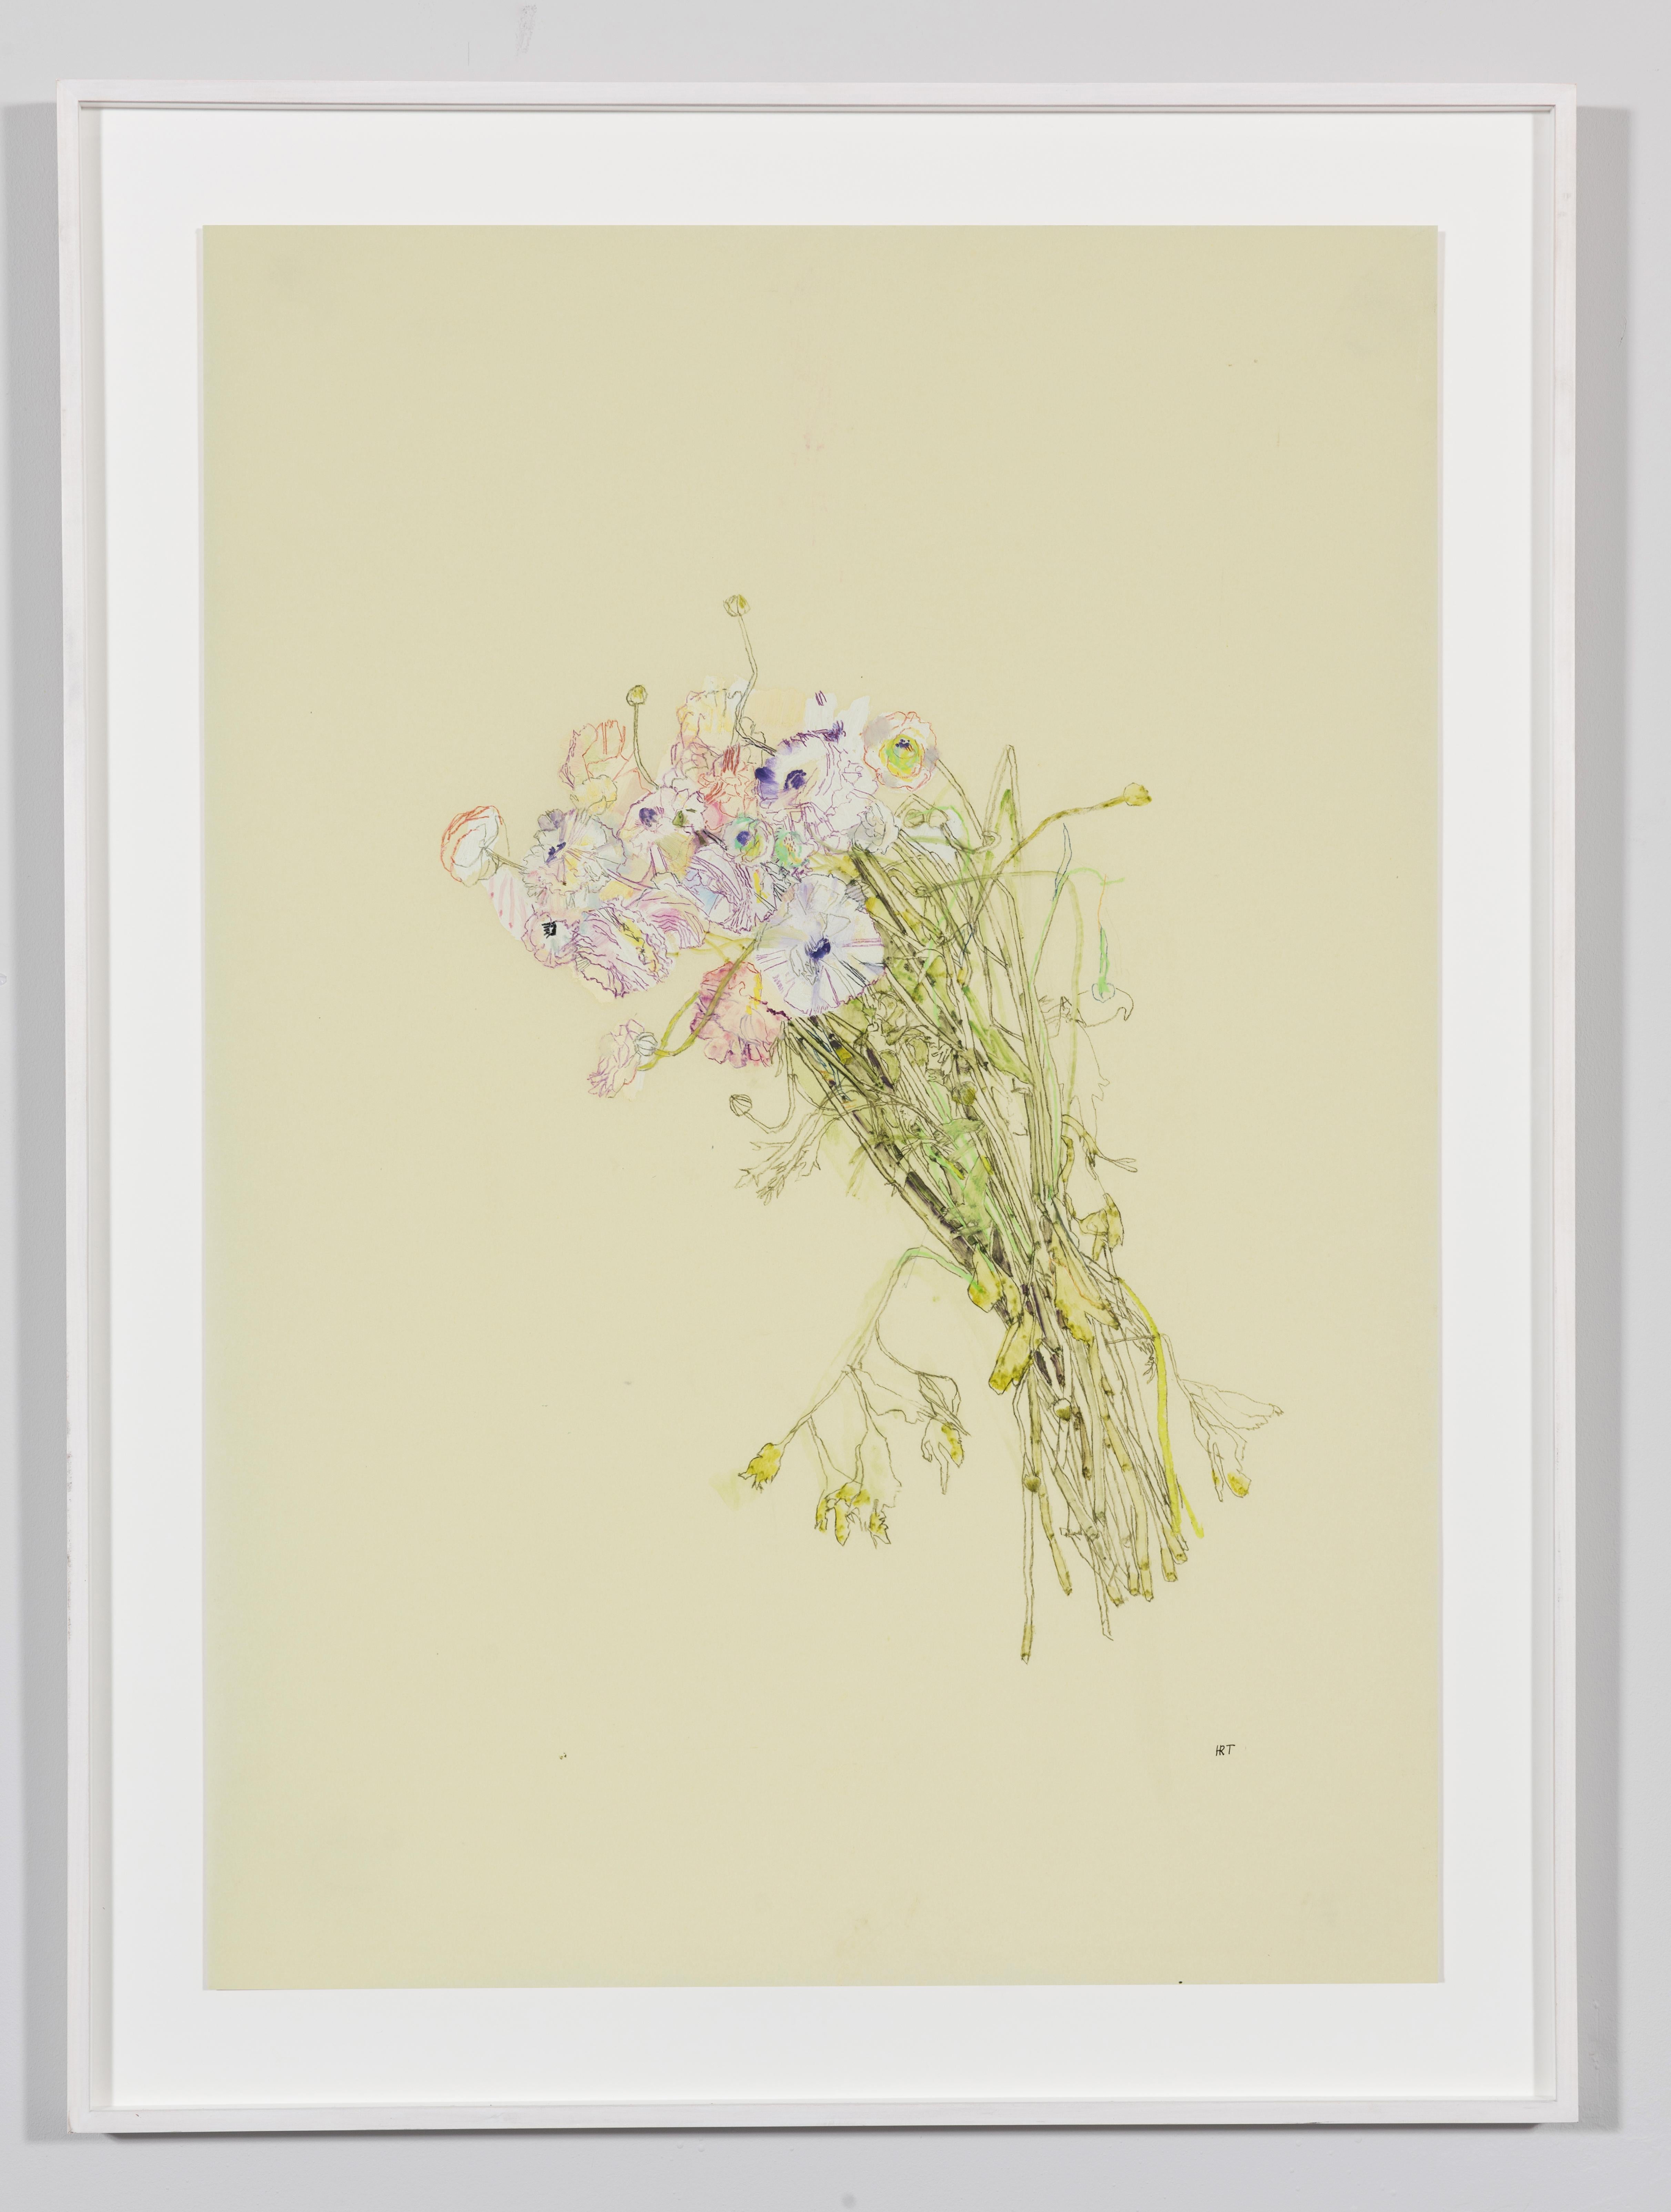 Flowers (A Bunch), Mixed media on Pergamenata parchment - Art by Howard Tangye